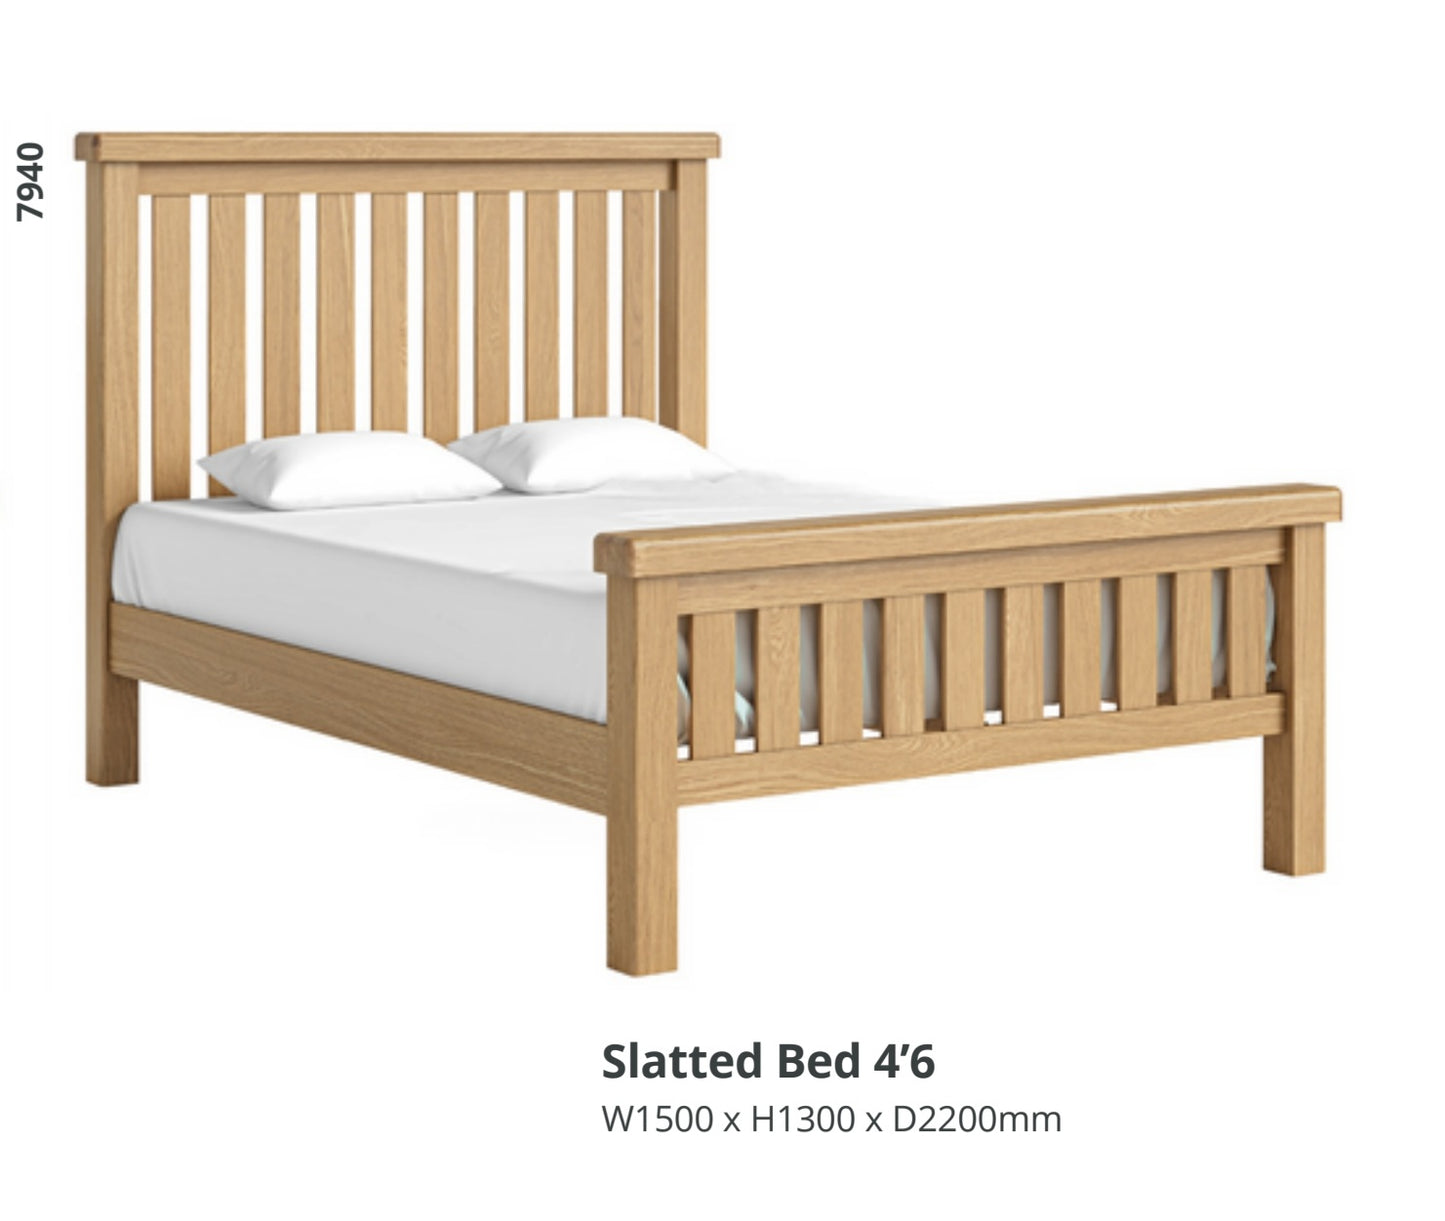 Normandy Slatted Beds